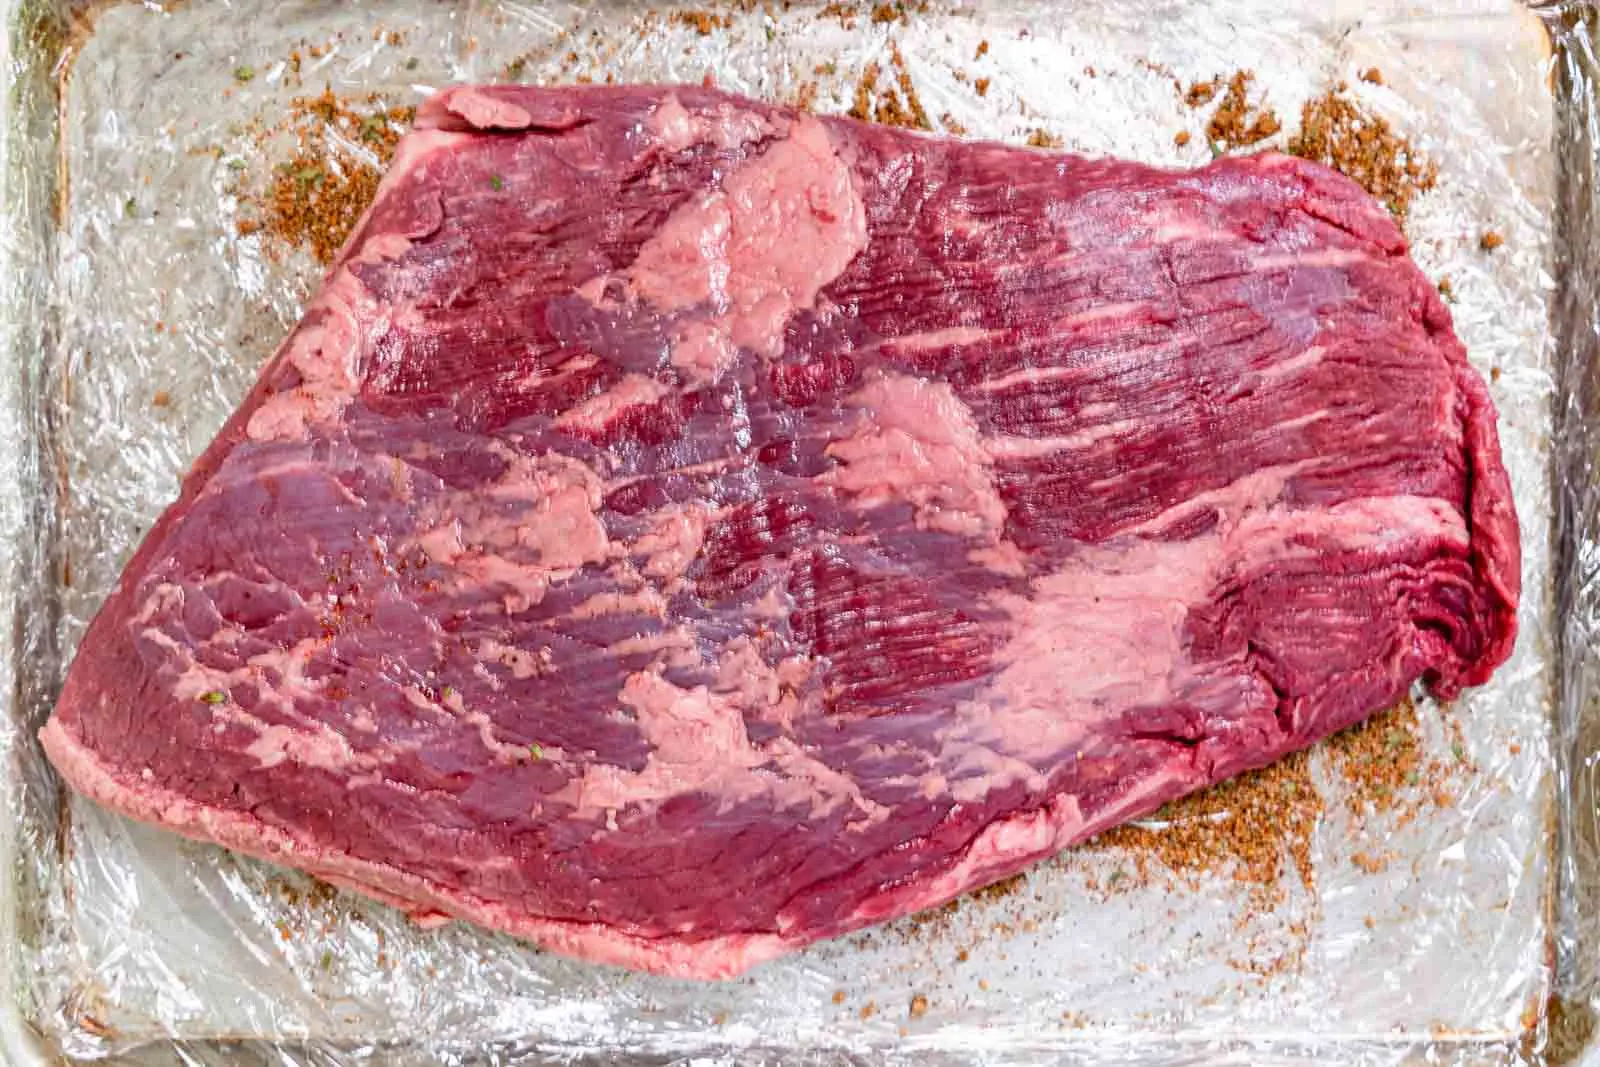 A raw brisket sitting on a baking sheet dusted with dry rub ingredients.